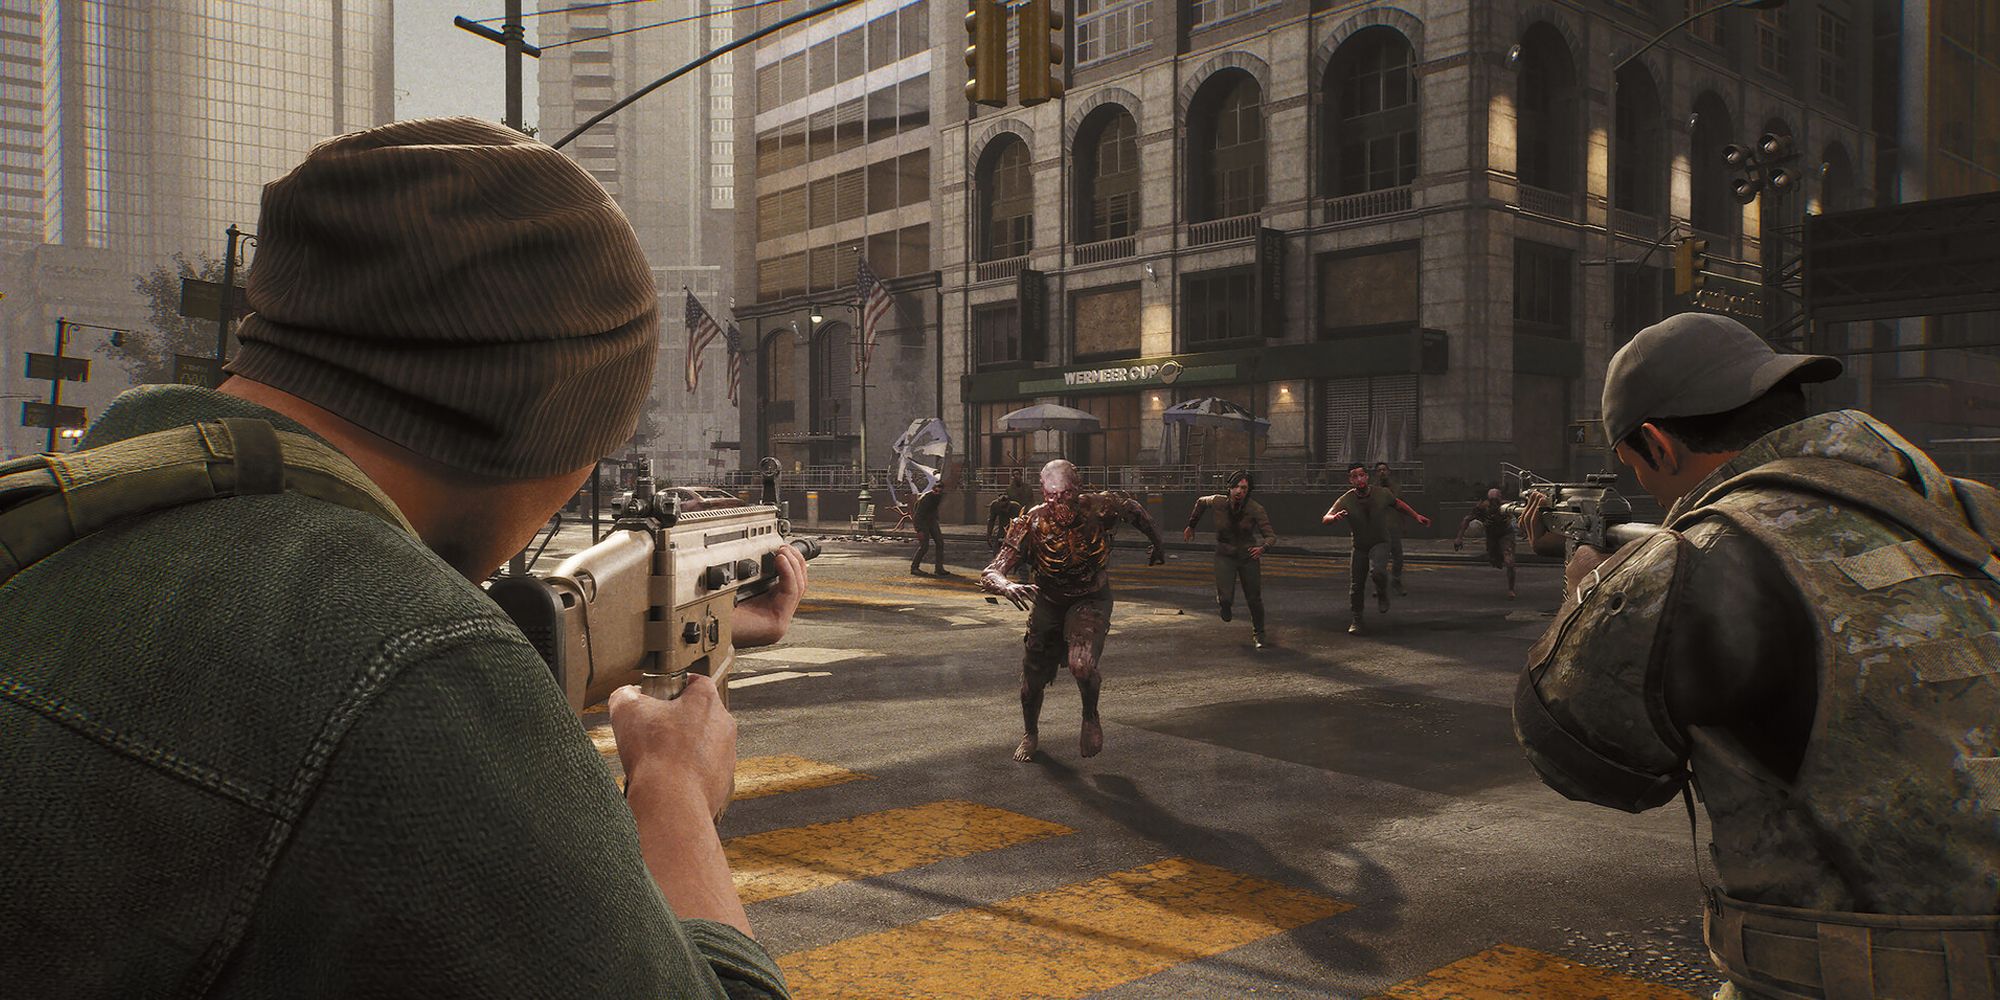 The Day Before players shooting zombies in a third-person view on a junction in a city surrounded by skyscrapers